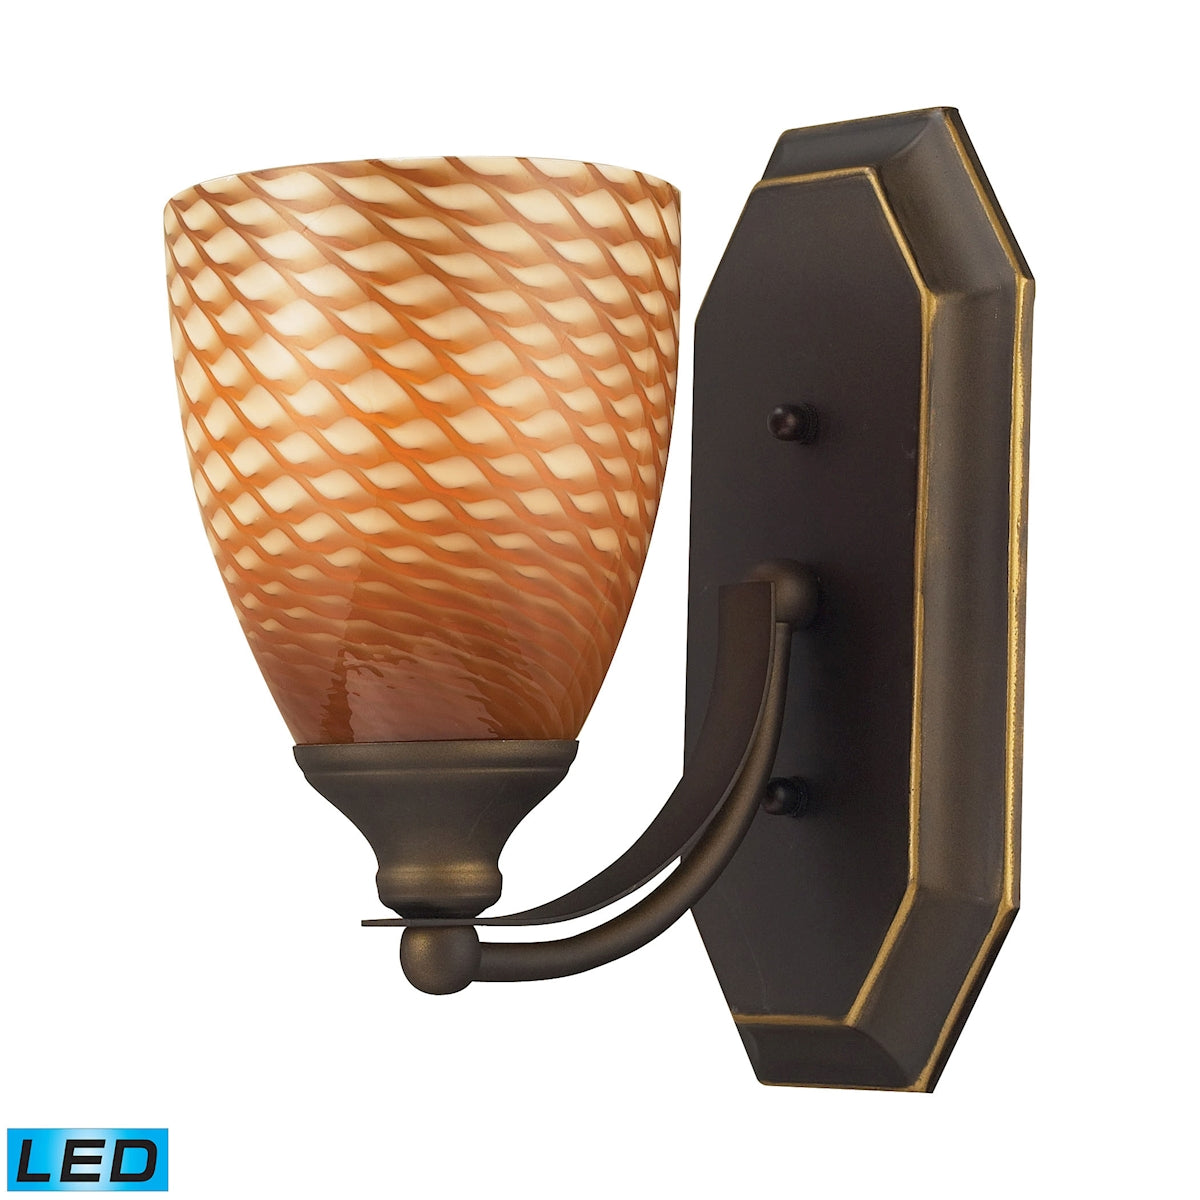 Mix-N-Match Vanity 1-Light Wall Lamp in Aged Bronze with Cocoa Glass - Includes LED Bulb